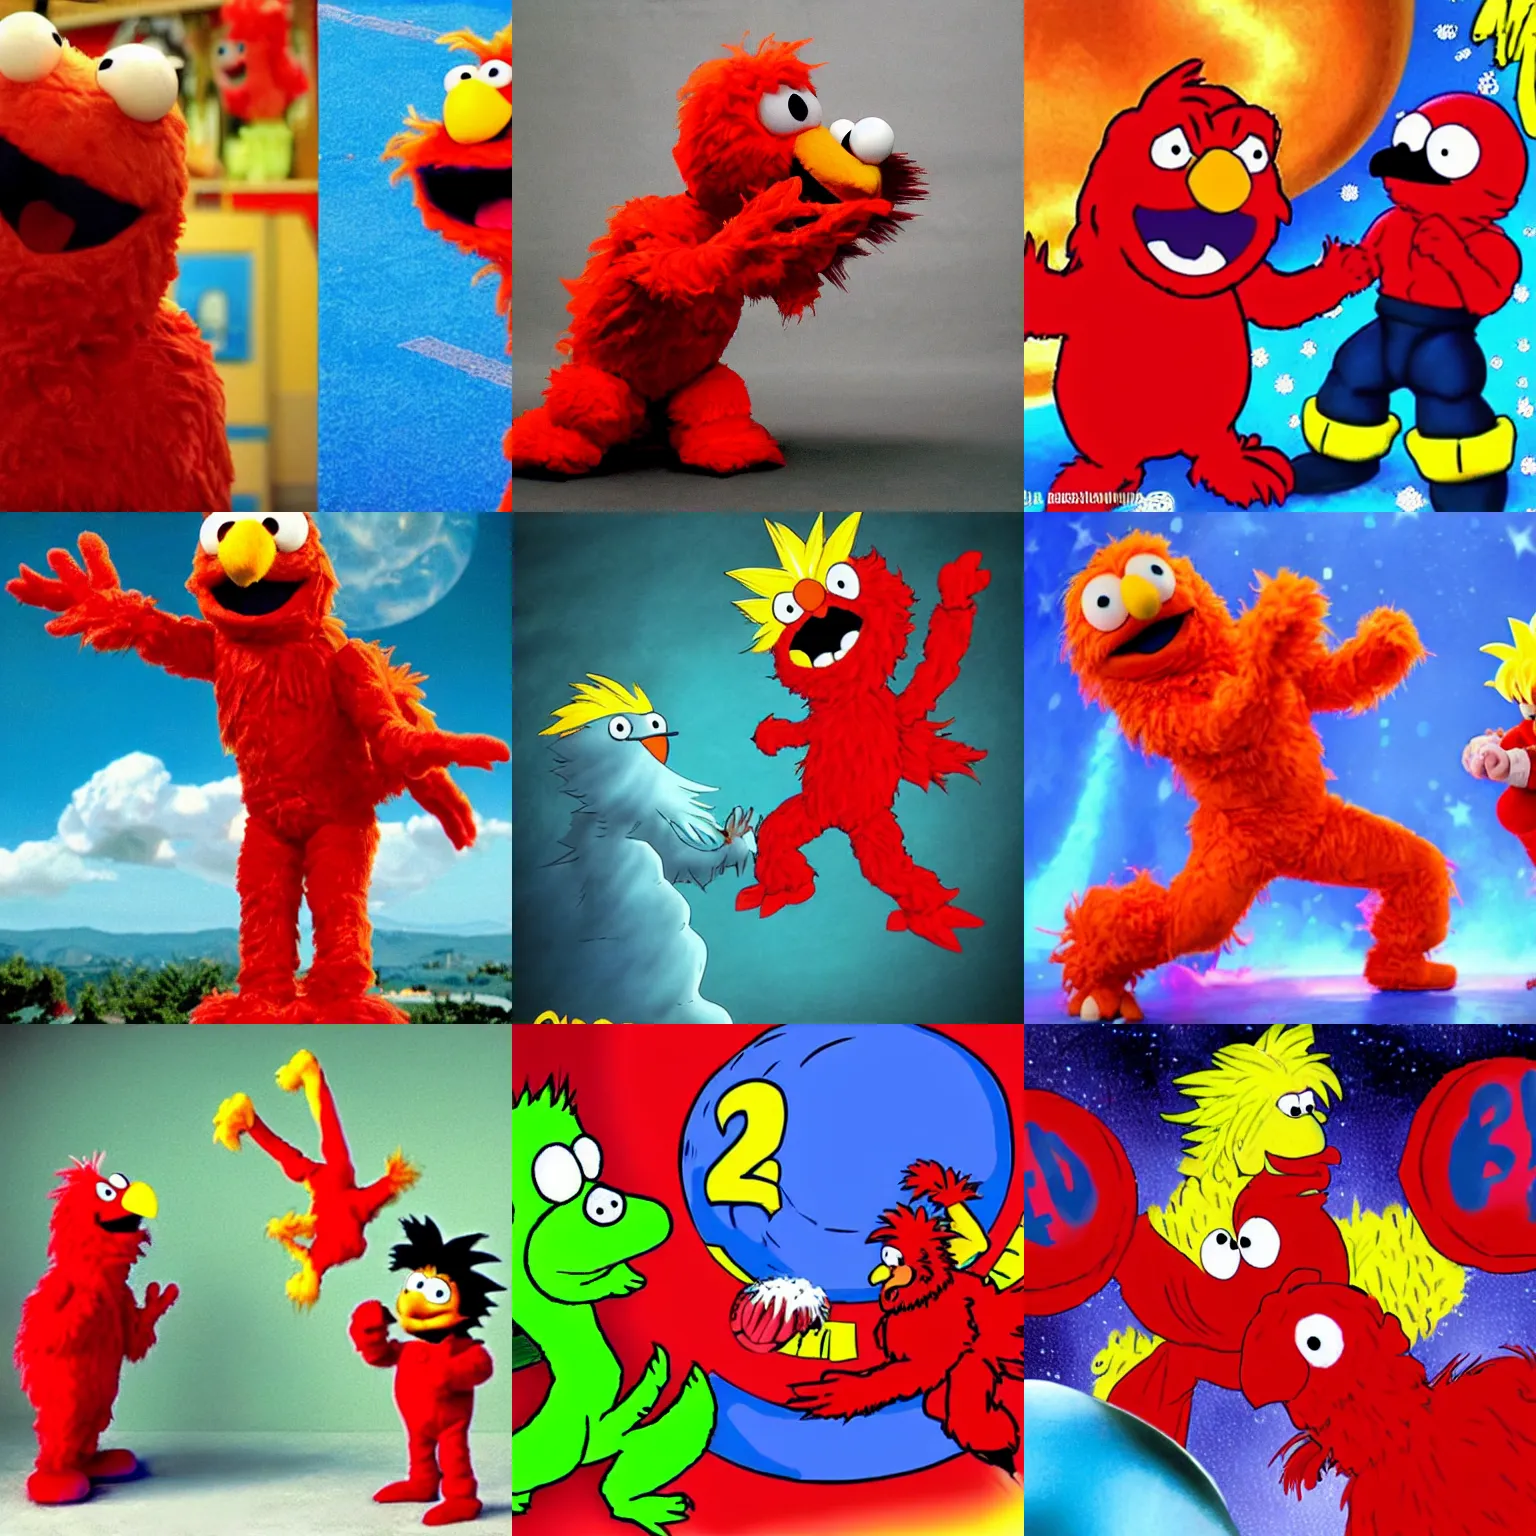 Prompt: Elmo fighting Big Bird in the style of the Dragonball Z anime